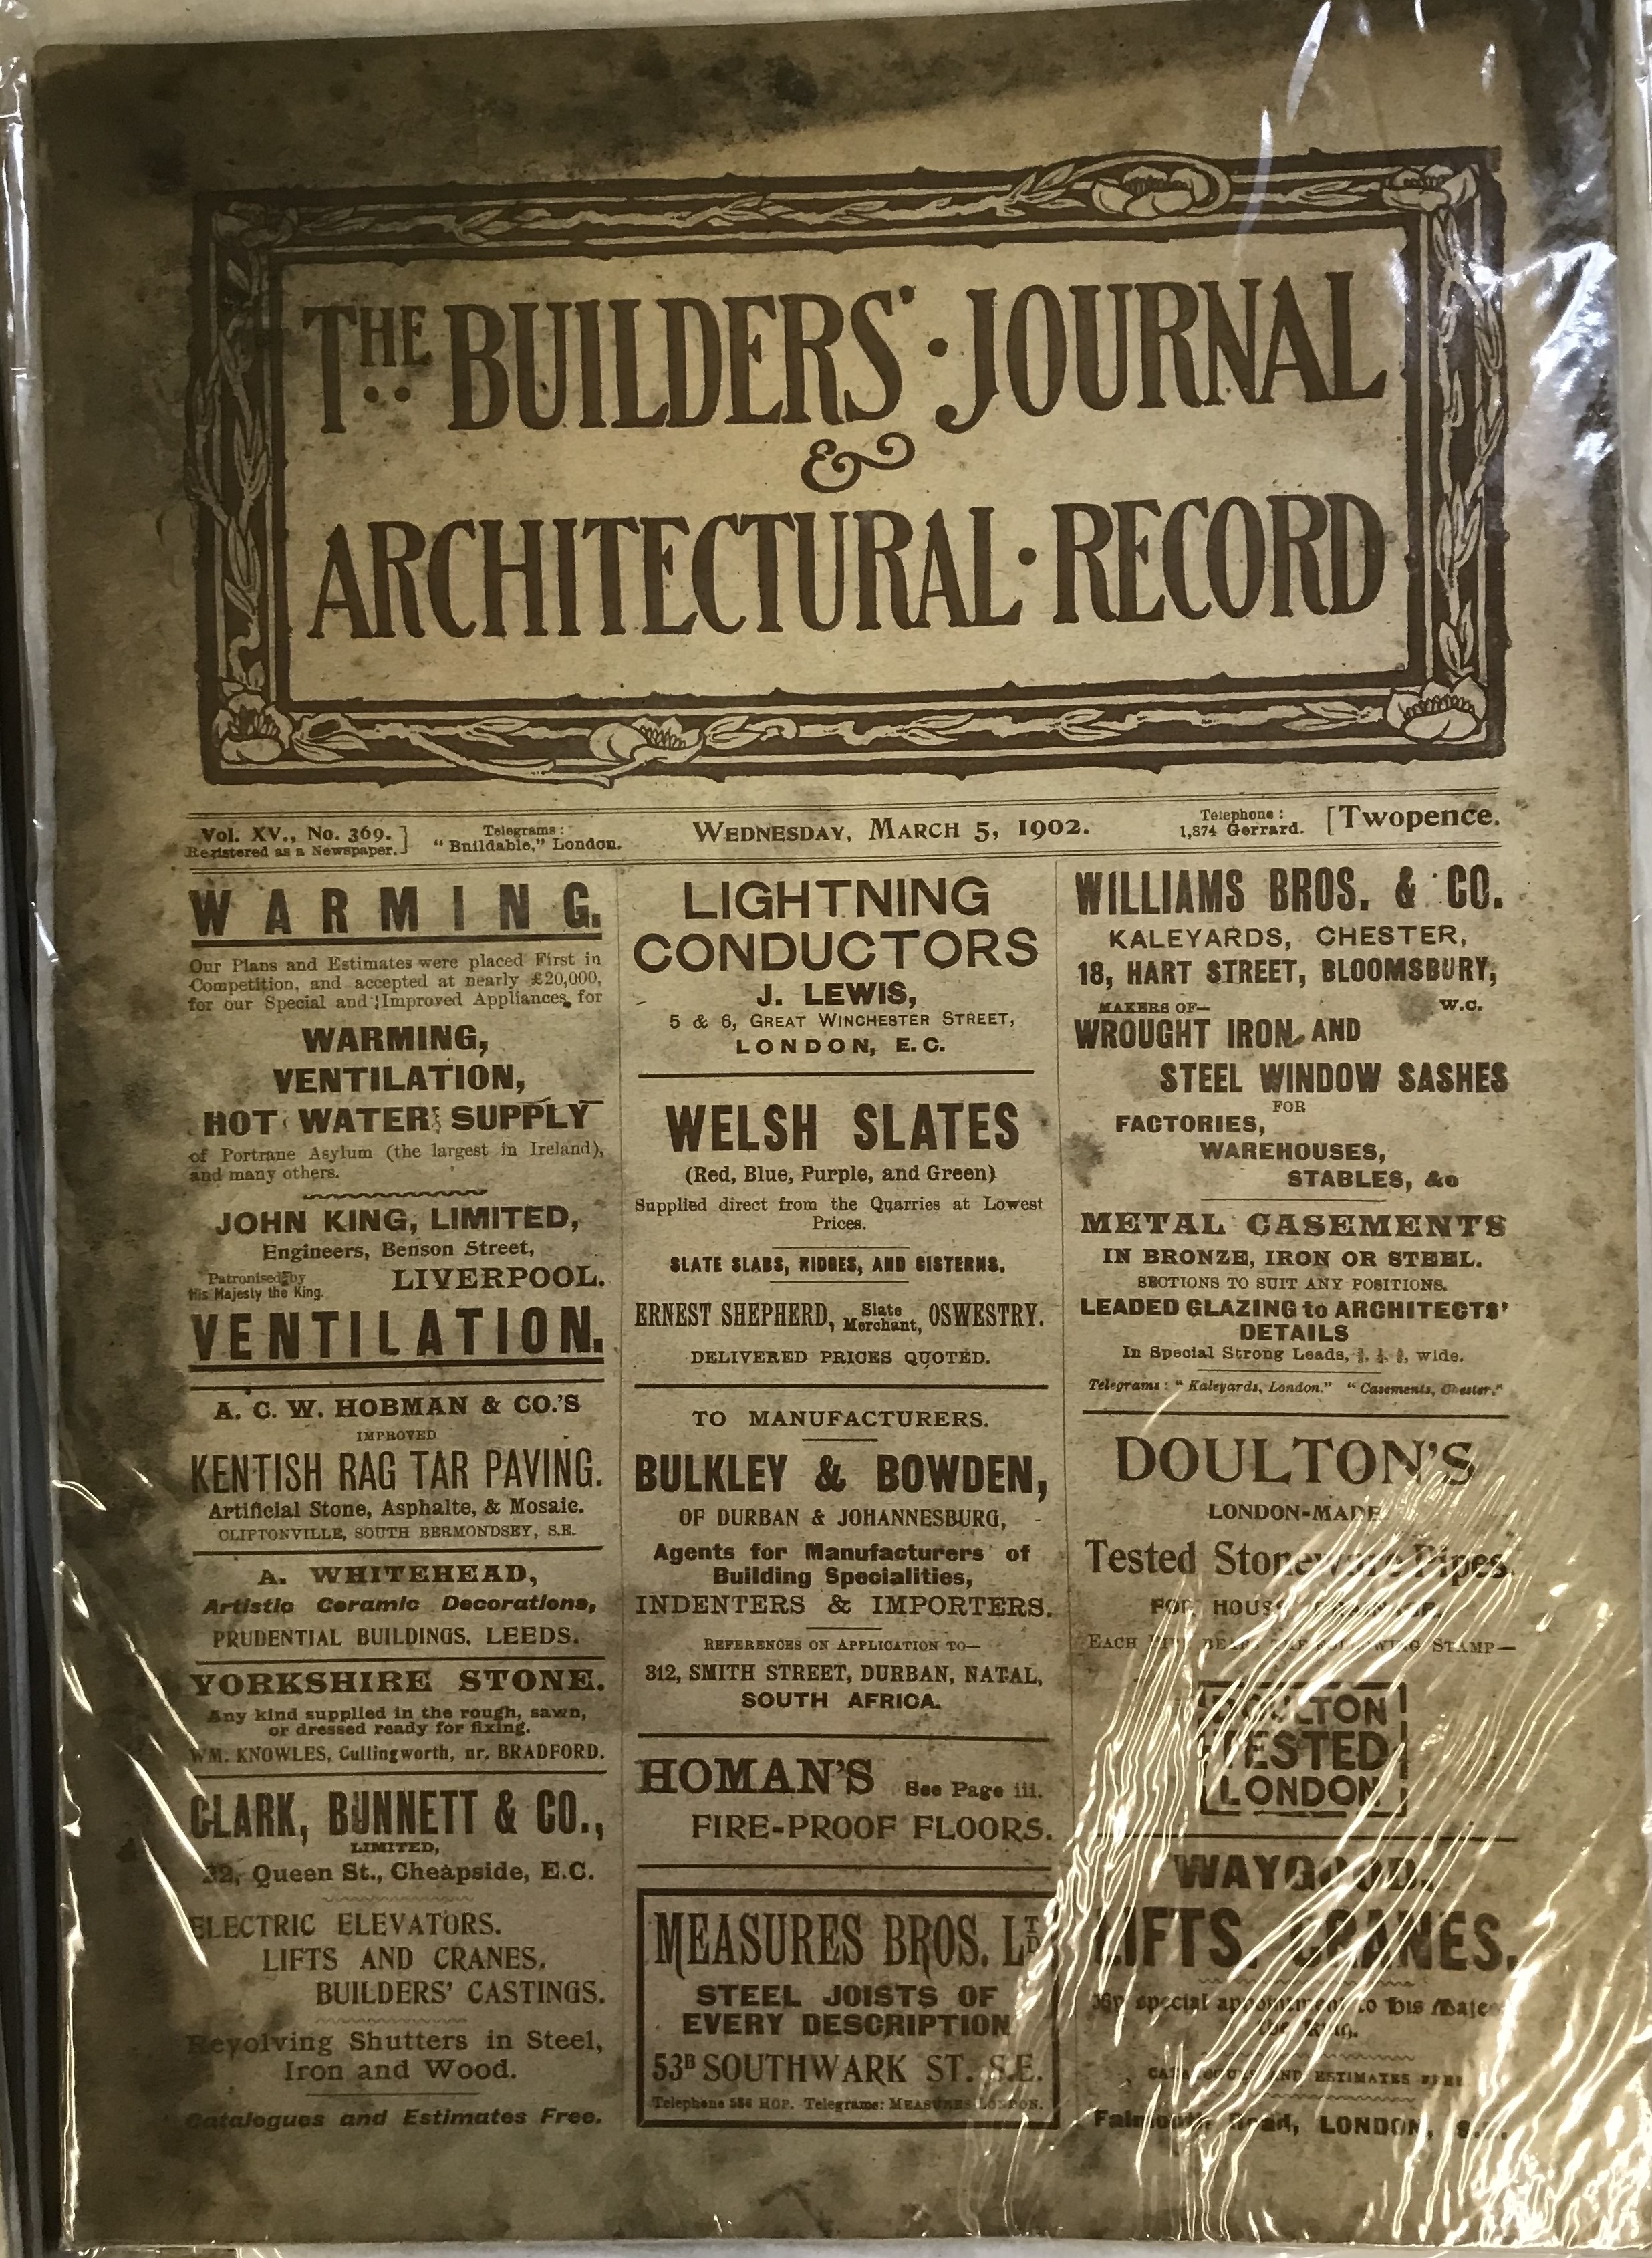 THE BUILDERS JOURNAL 1899 -1902 - Image 18 of 18